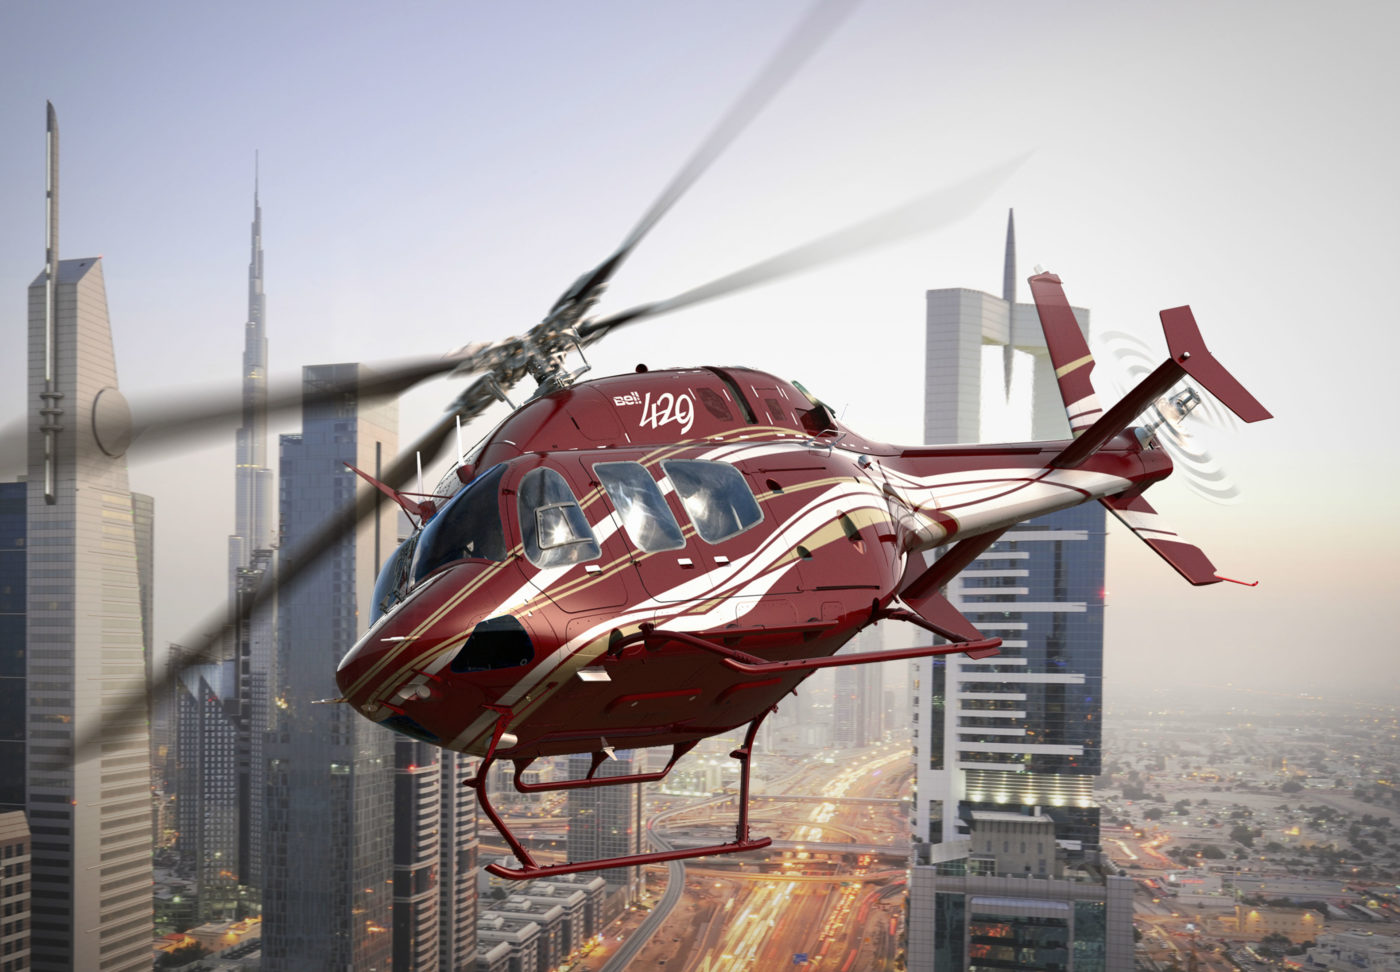 With the lowest vibrations in its class, the Bell 429 meets or exceeds today's airworthiness requirements to enhance occupant safety. Bell Photo